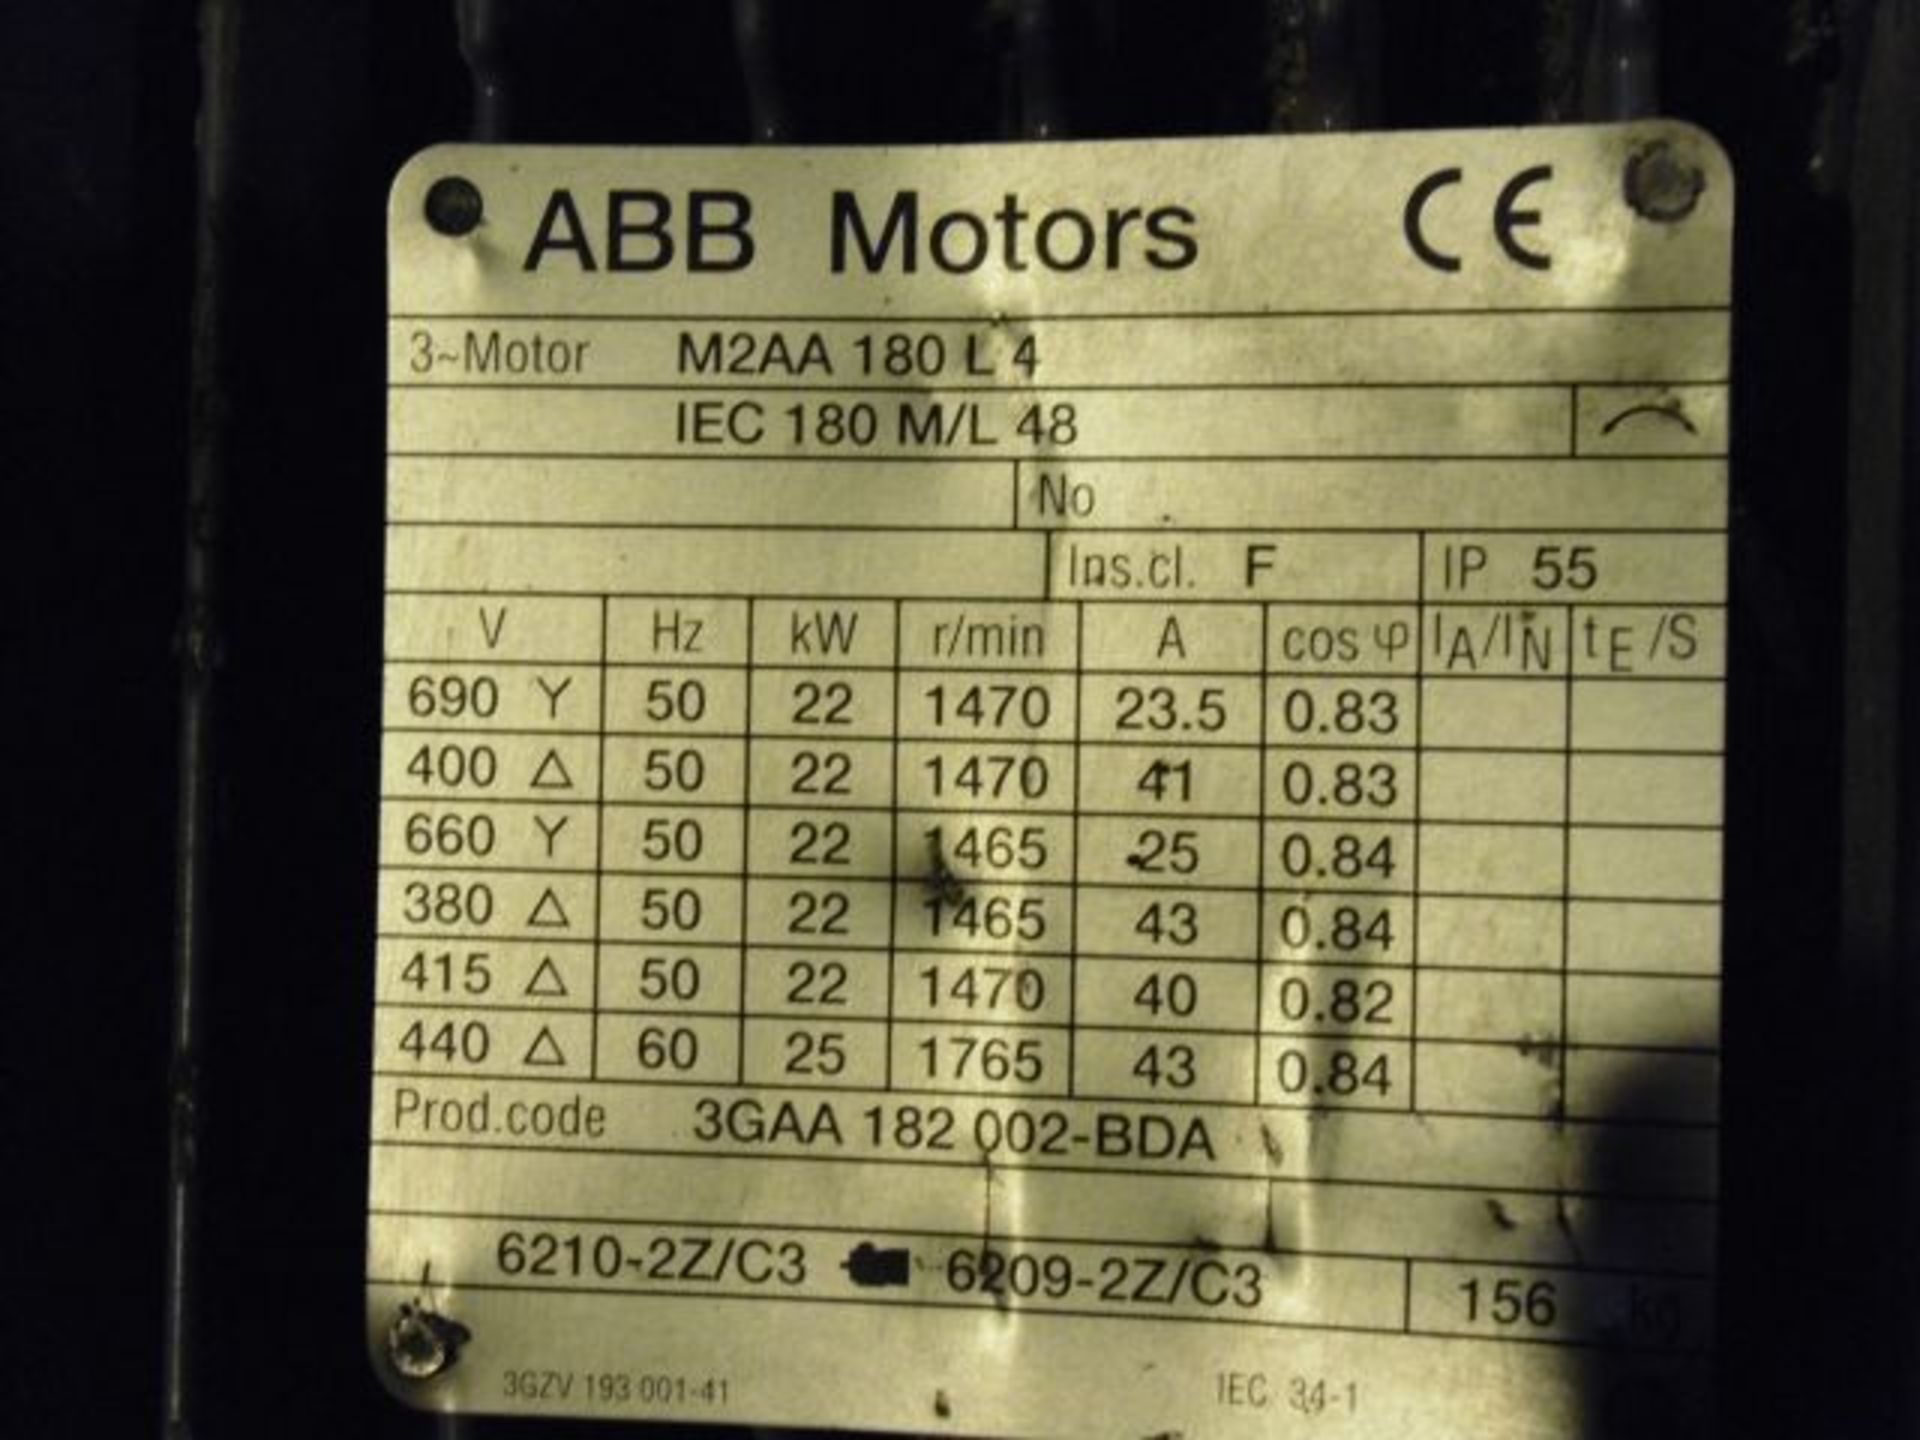 * ABB 22kw 3 Phase Motor; type M2AA 180 L4; 156kg; 1470 R/Min. Loaded onto Buyer's Transport - Image 2 of 2